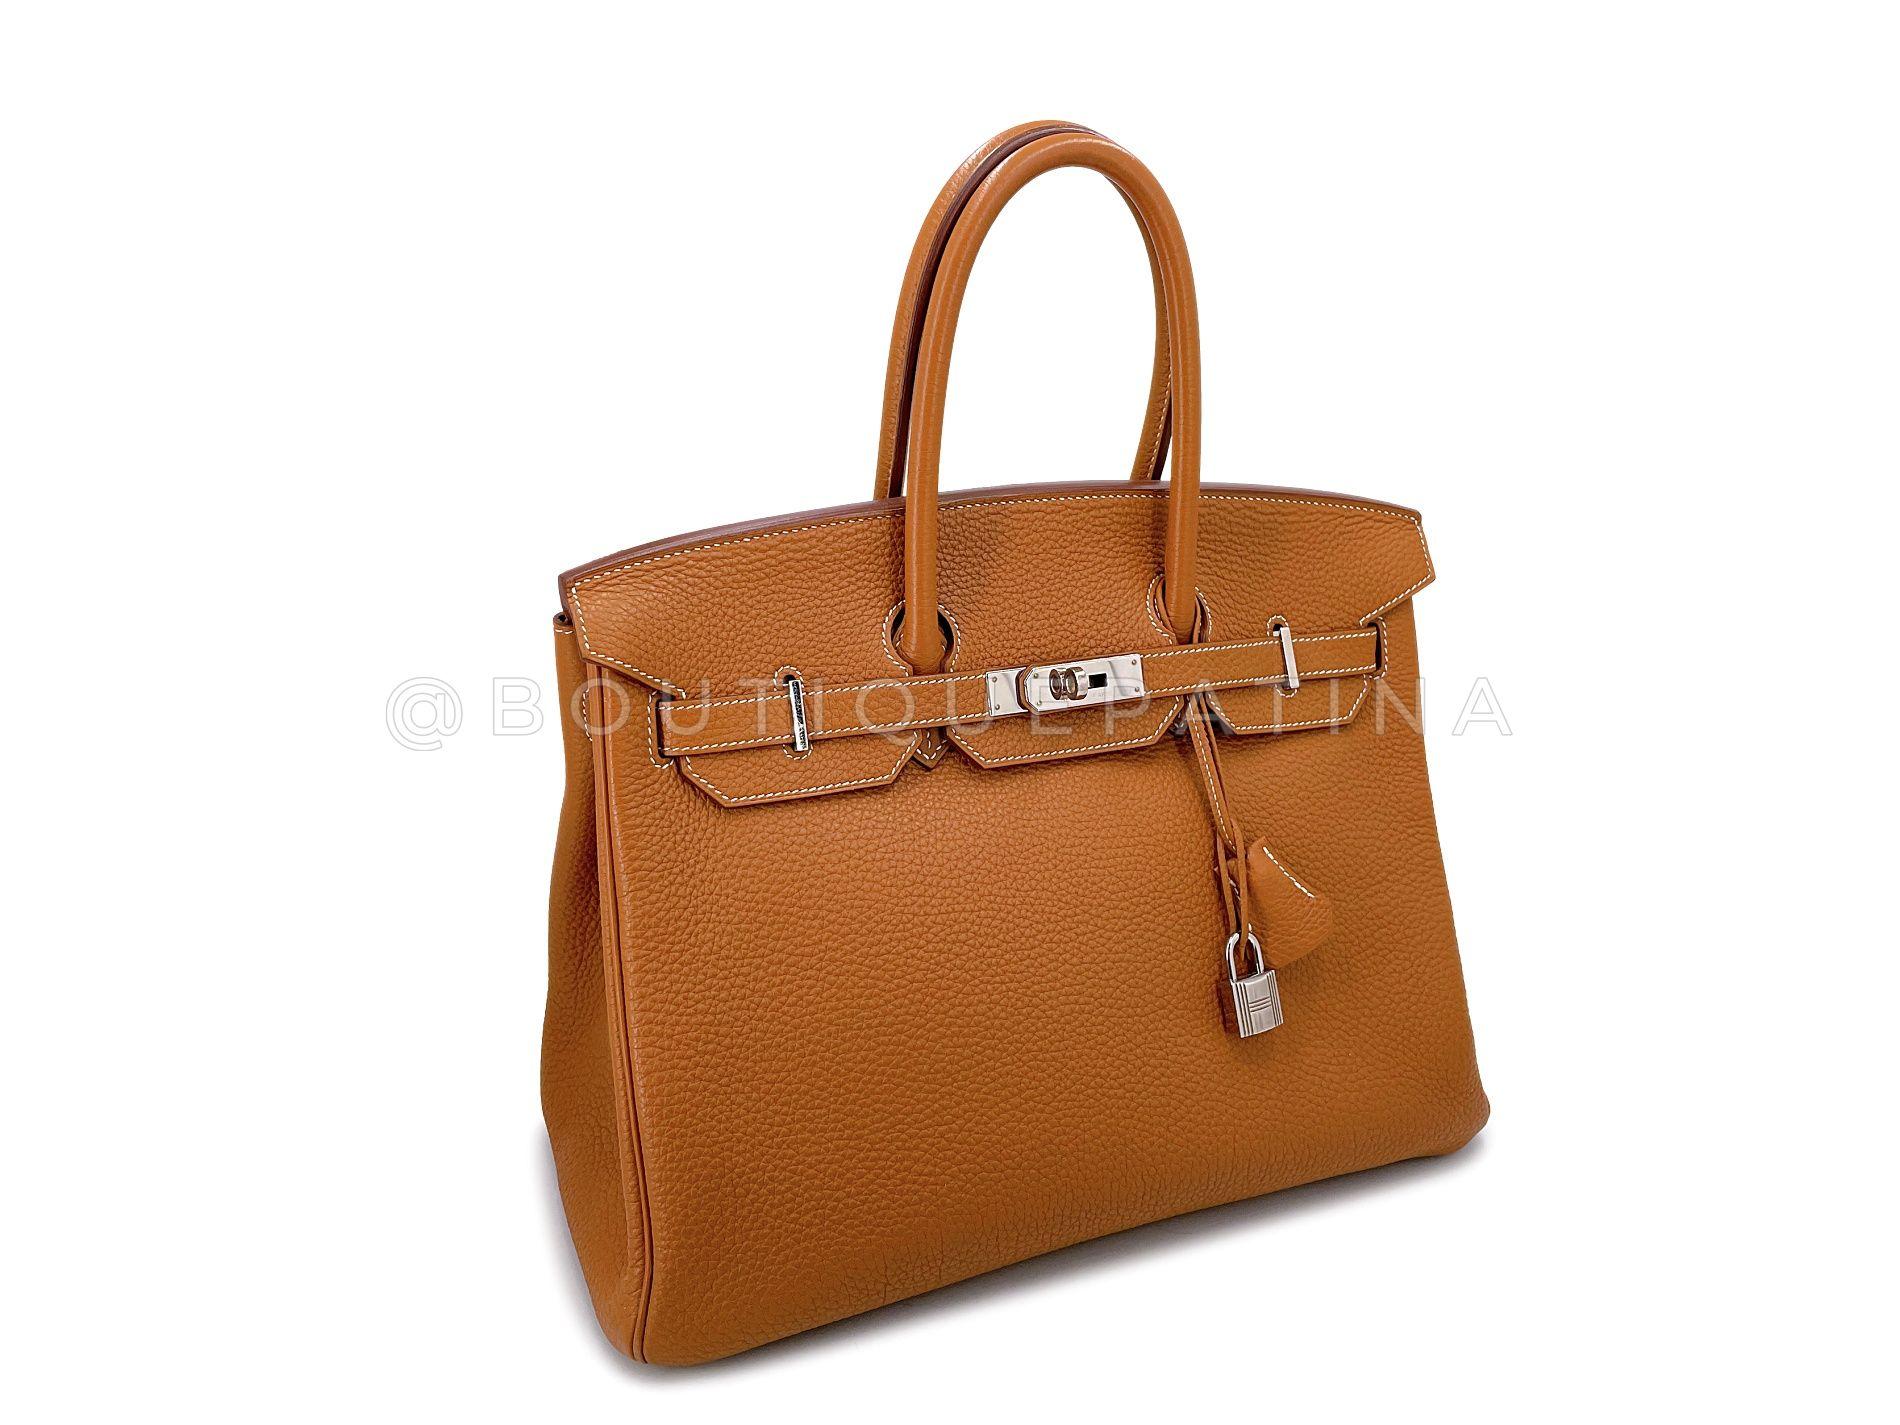 Store item: 68060
The Hermès Birkin is probably one of the most coveted and desired bags in the world. 

In Gold togo and palladium hardware. Sturdy 